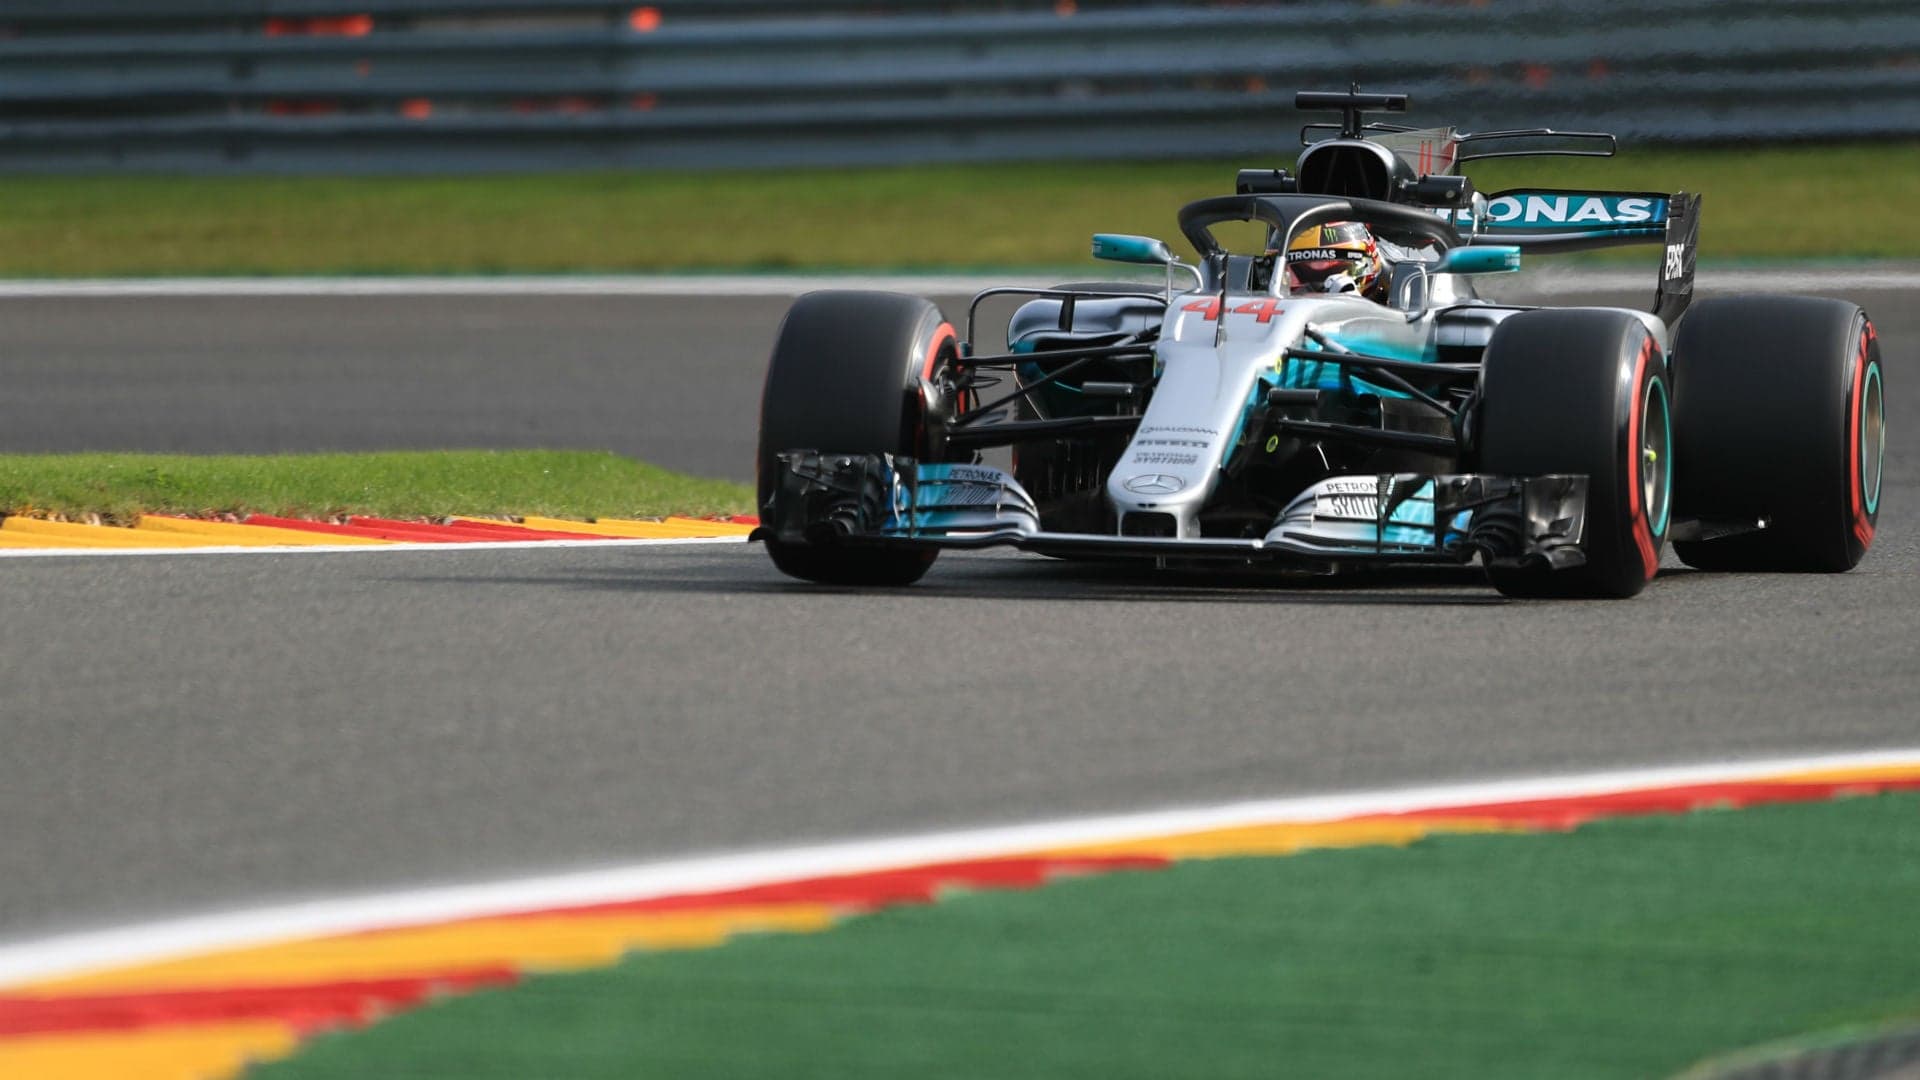 F1 Halo Capable of Holding Double-Decker Bus, Says Mercedes